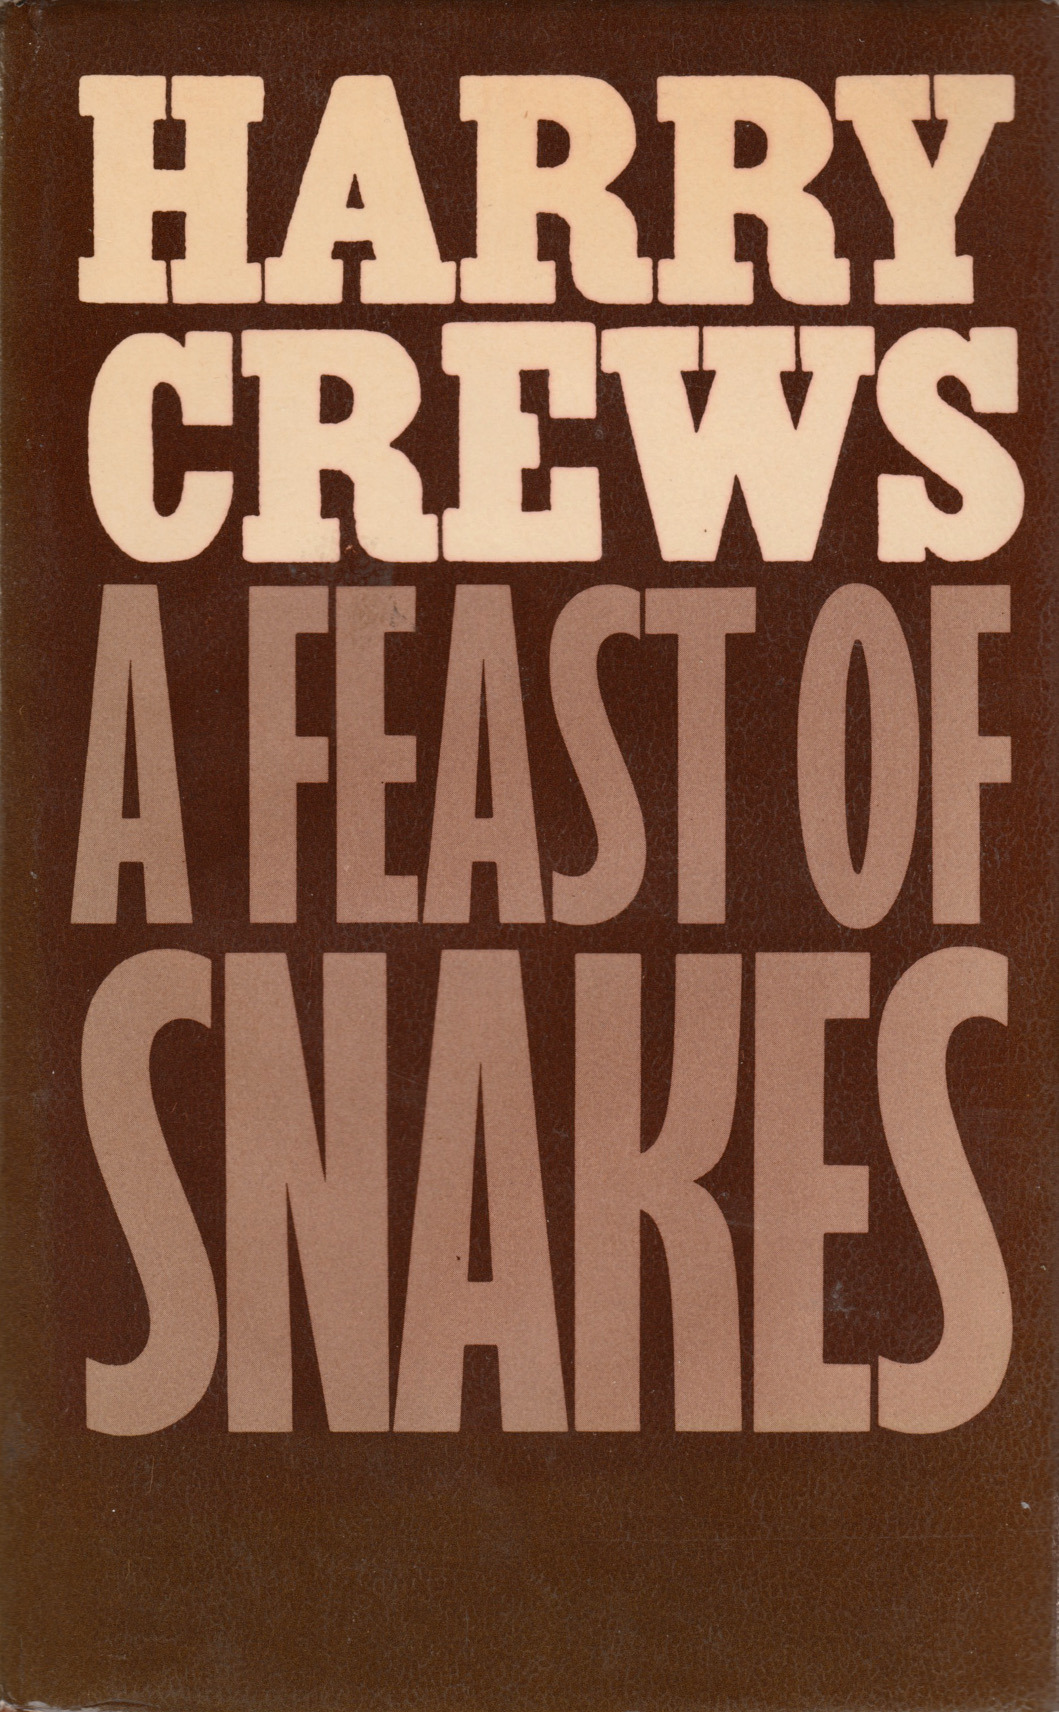 A Feast Of Snakes, by Harry Crews (Secker &amp; Warburg, 1977). From a charity